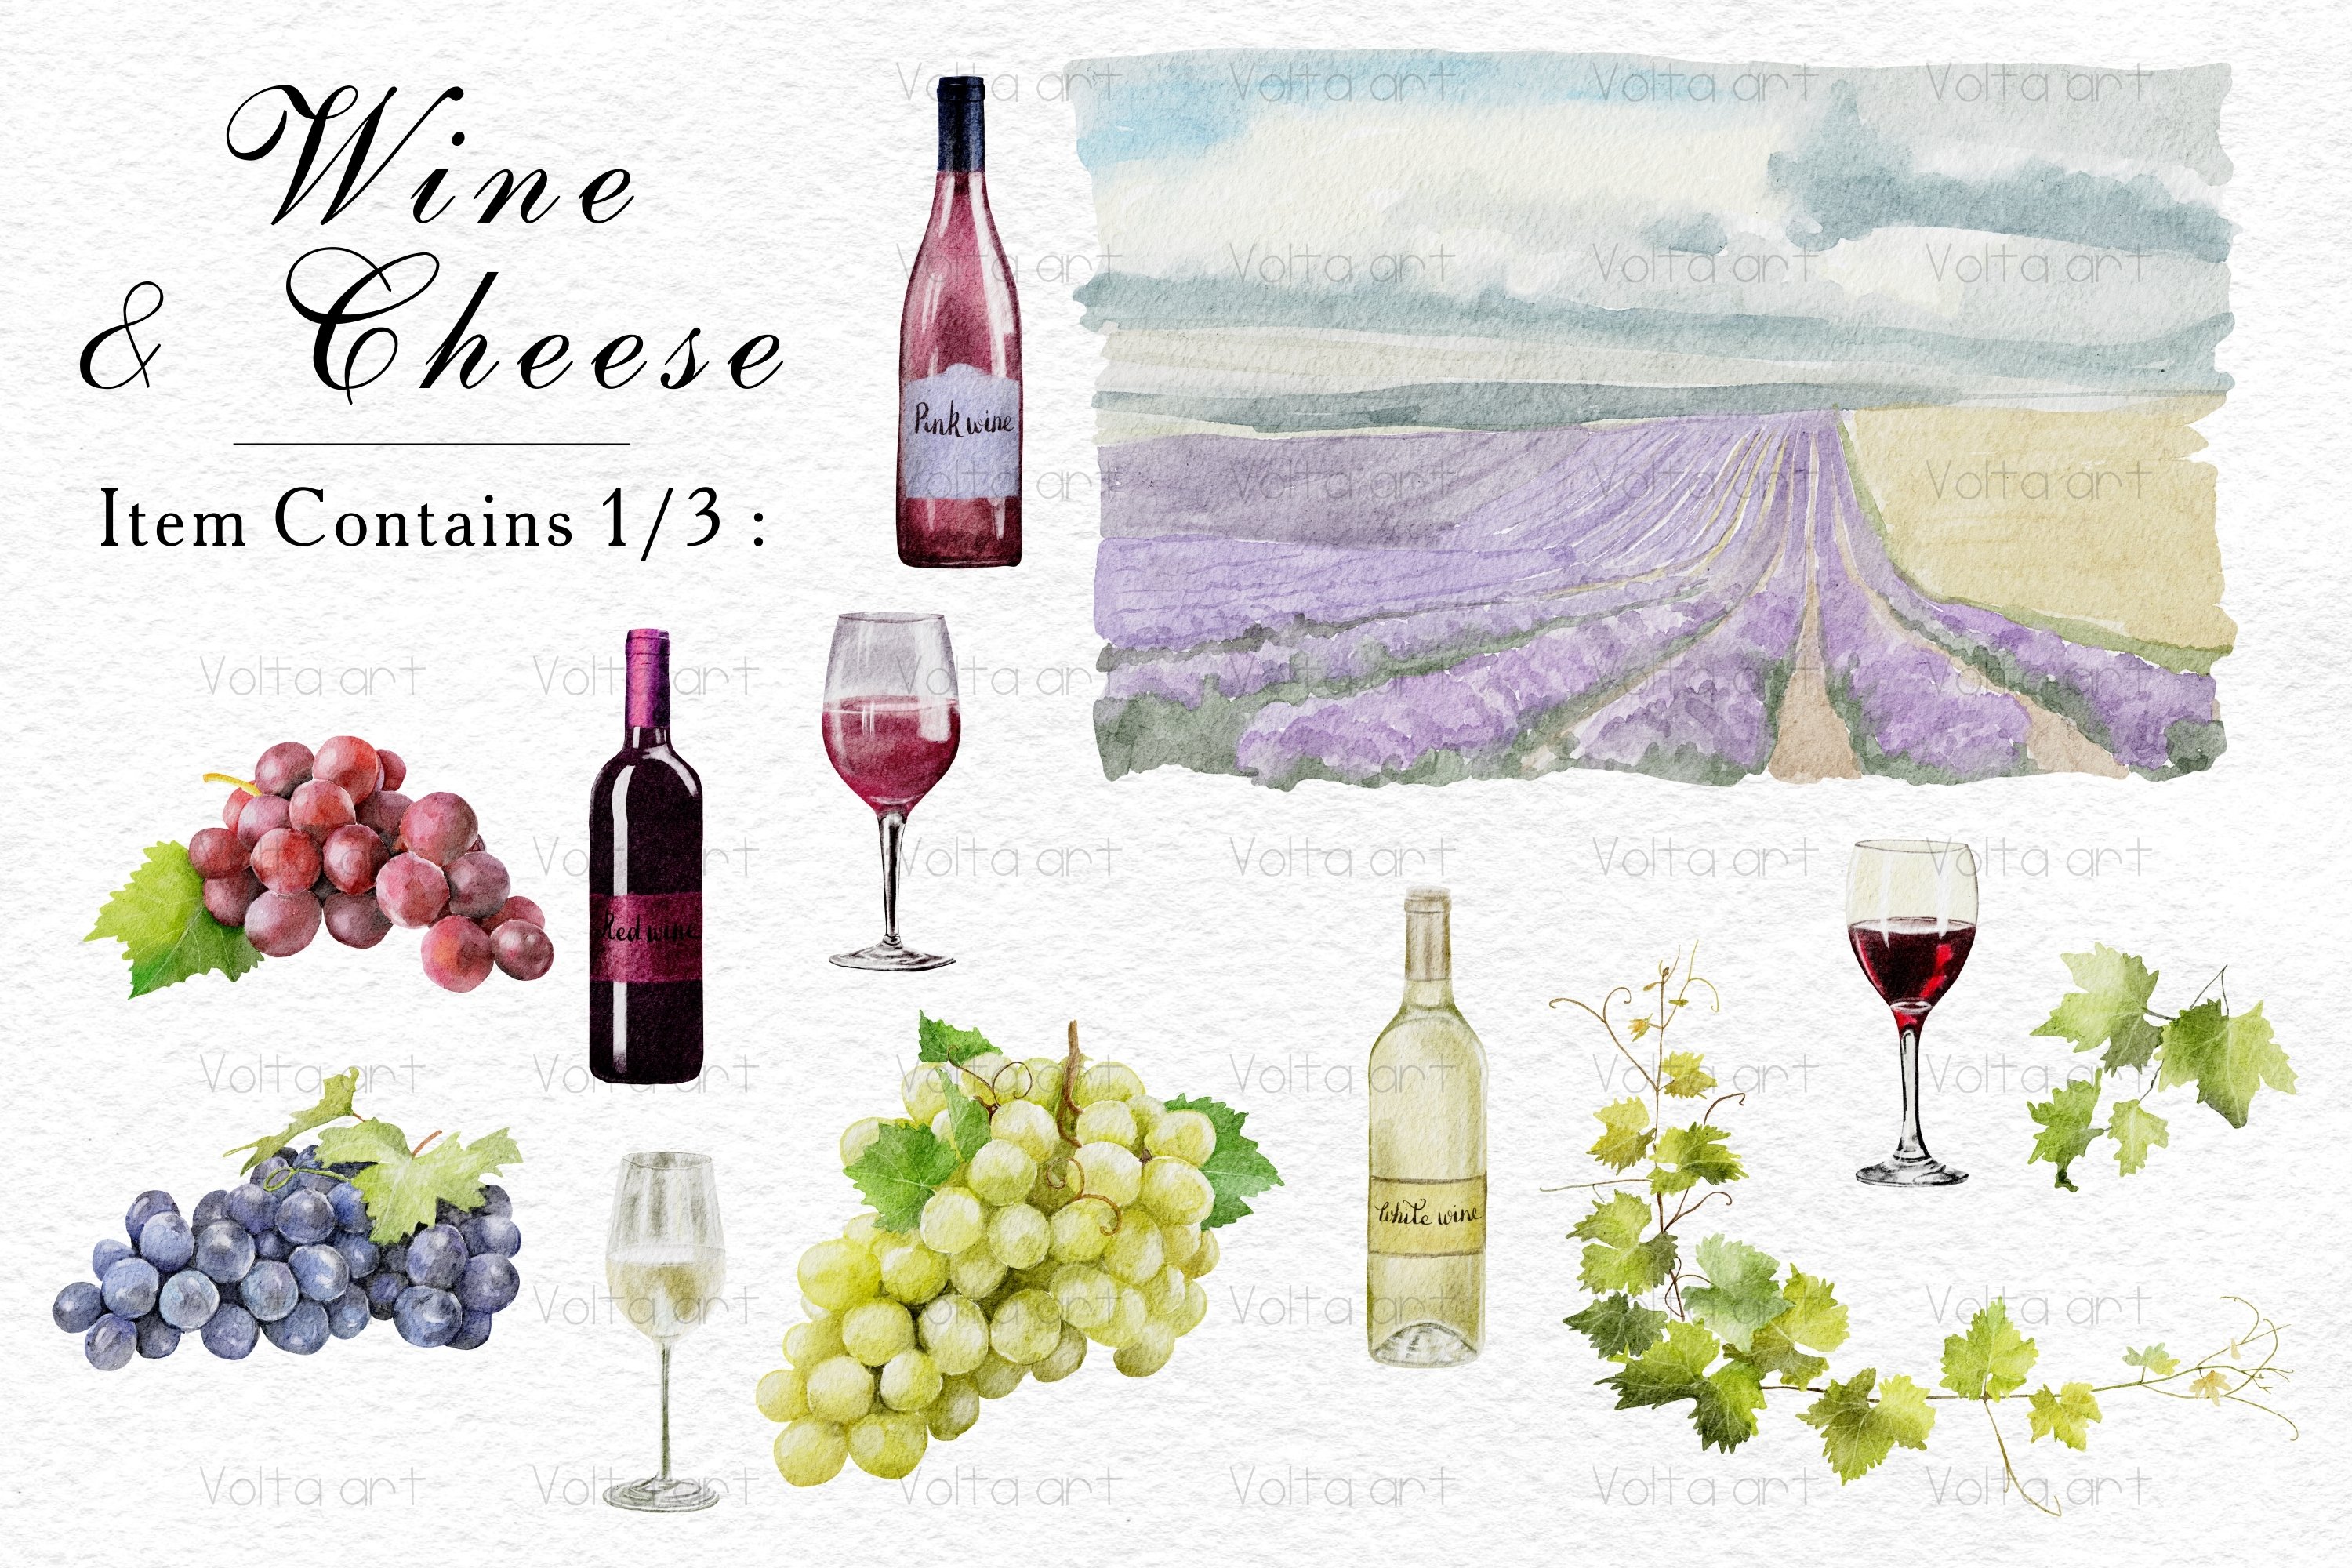 Set of watercolor images of wine bottles, grapes, glasses of wine.